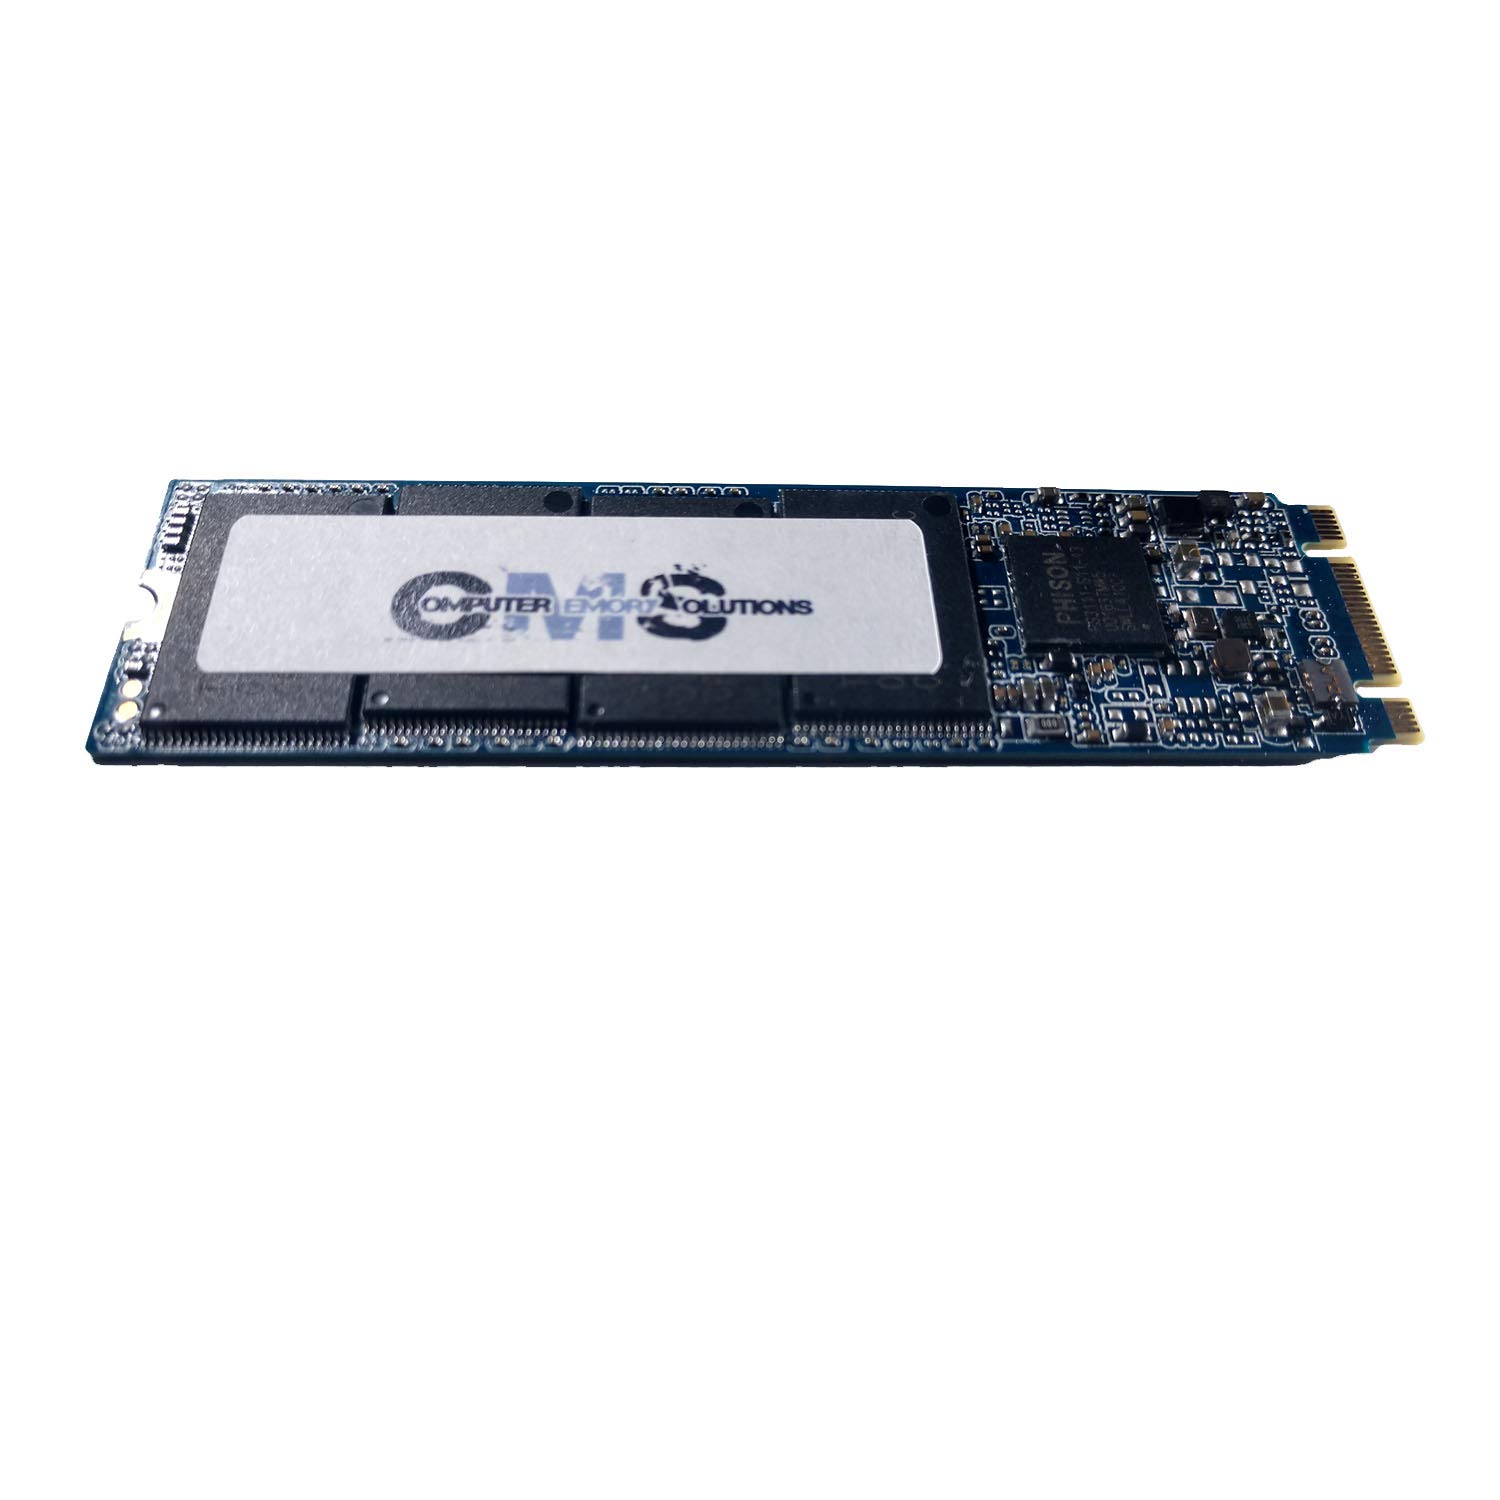 Computer Memory Solutions CMS 512GB SSDNow M.2 2280 SATA 6GB Compatible with Acer Aspire 5 A515-43-R4Z2, A515-43-R5RE, A515-43-R6DE, A515-51, A515-52 - C82